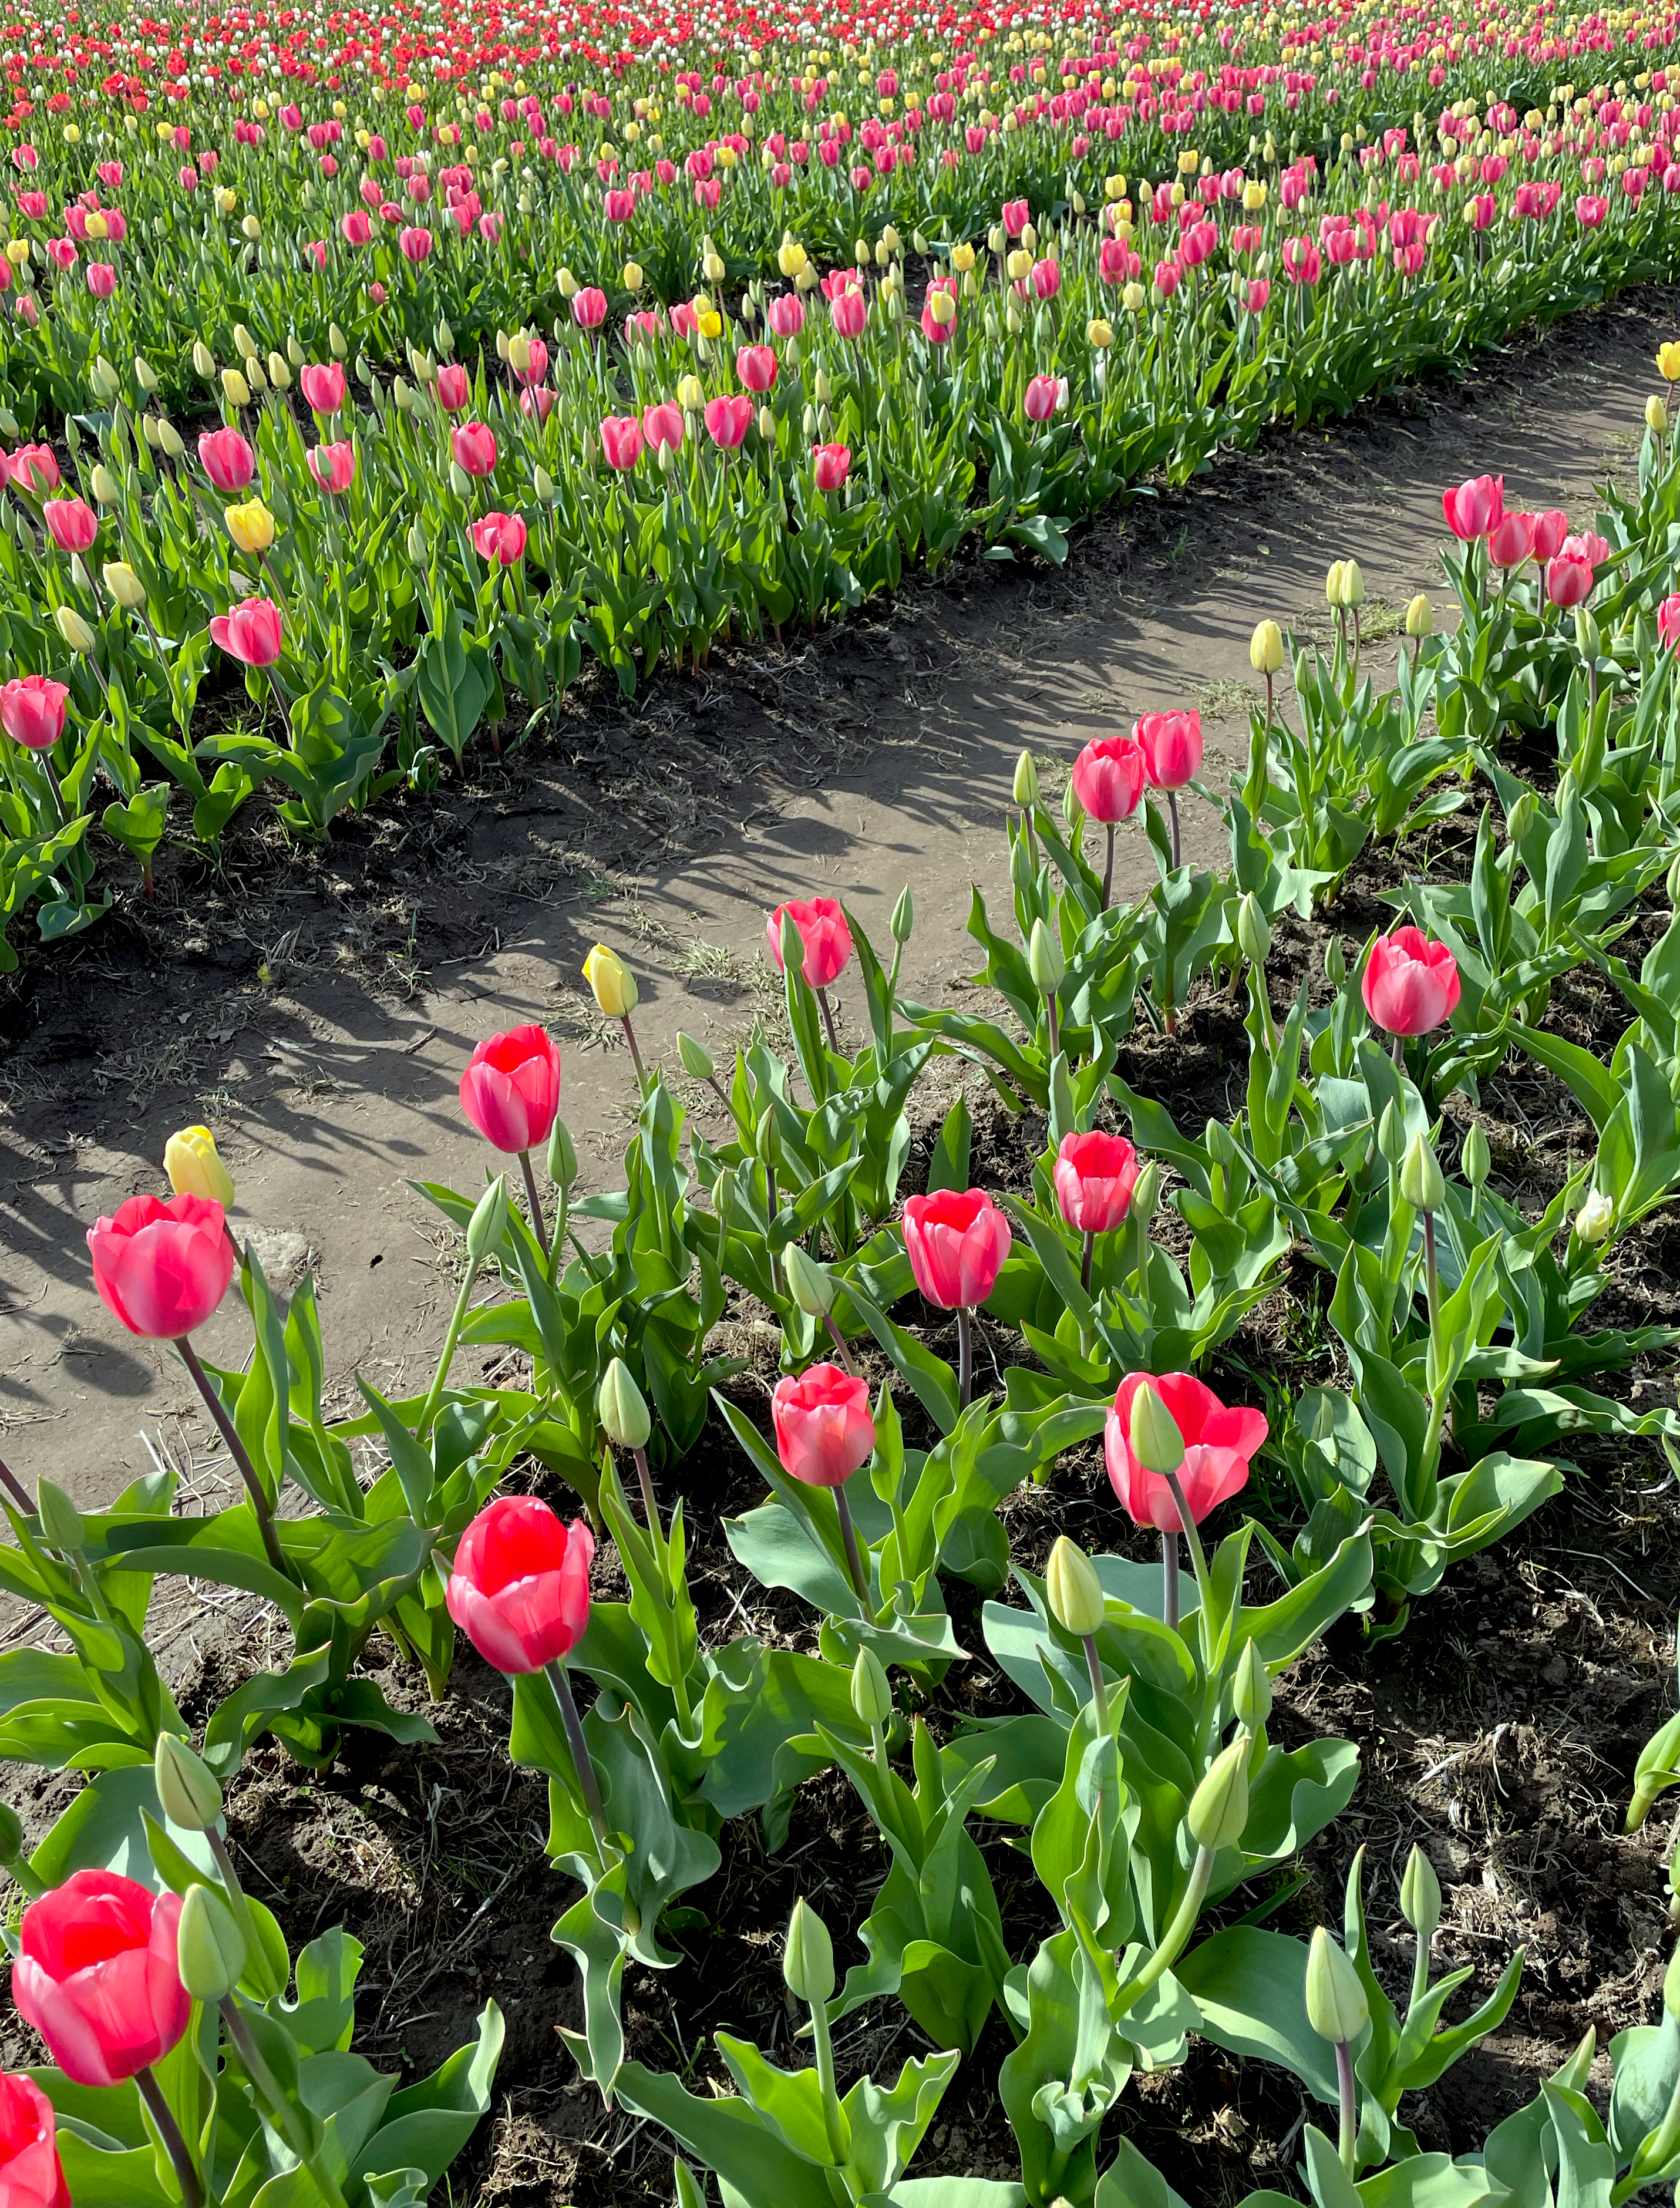 Tulips in rows at Wicked Tulips